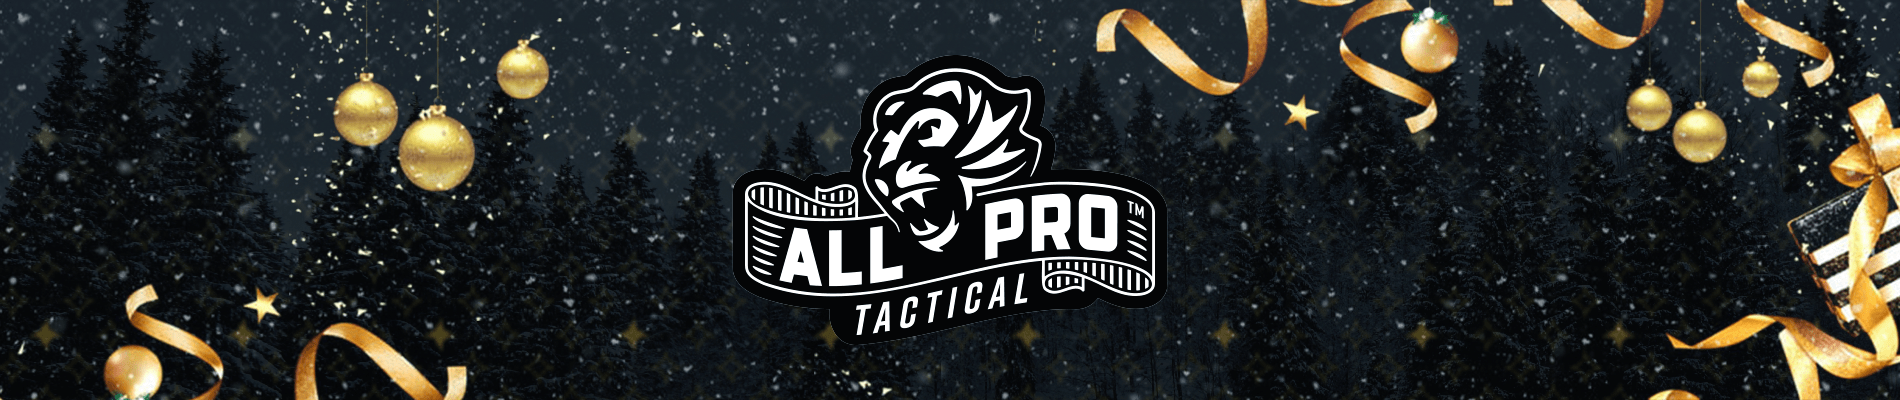 All-Pro Tactical Holiday Banner